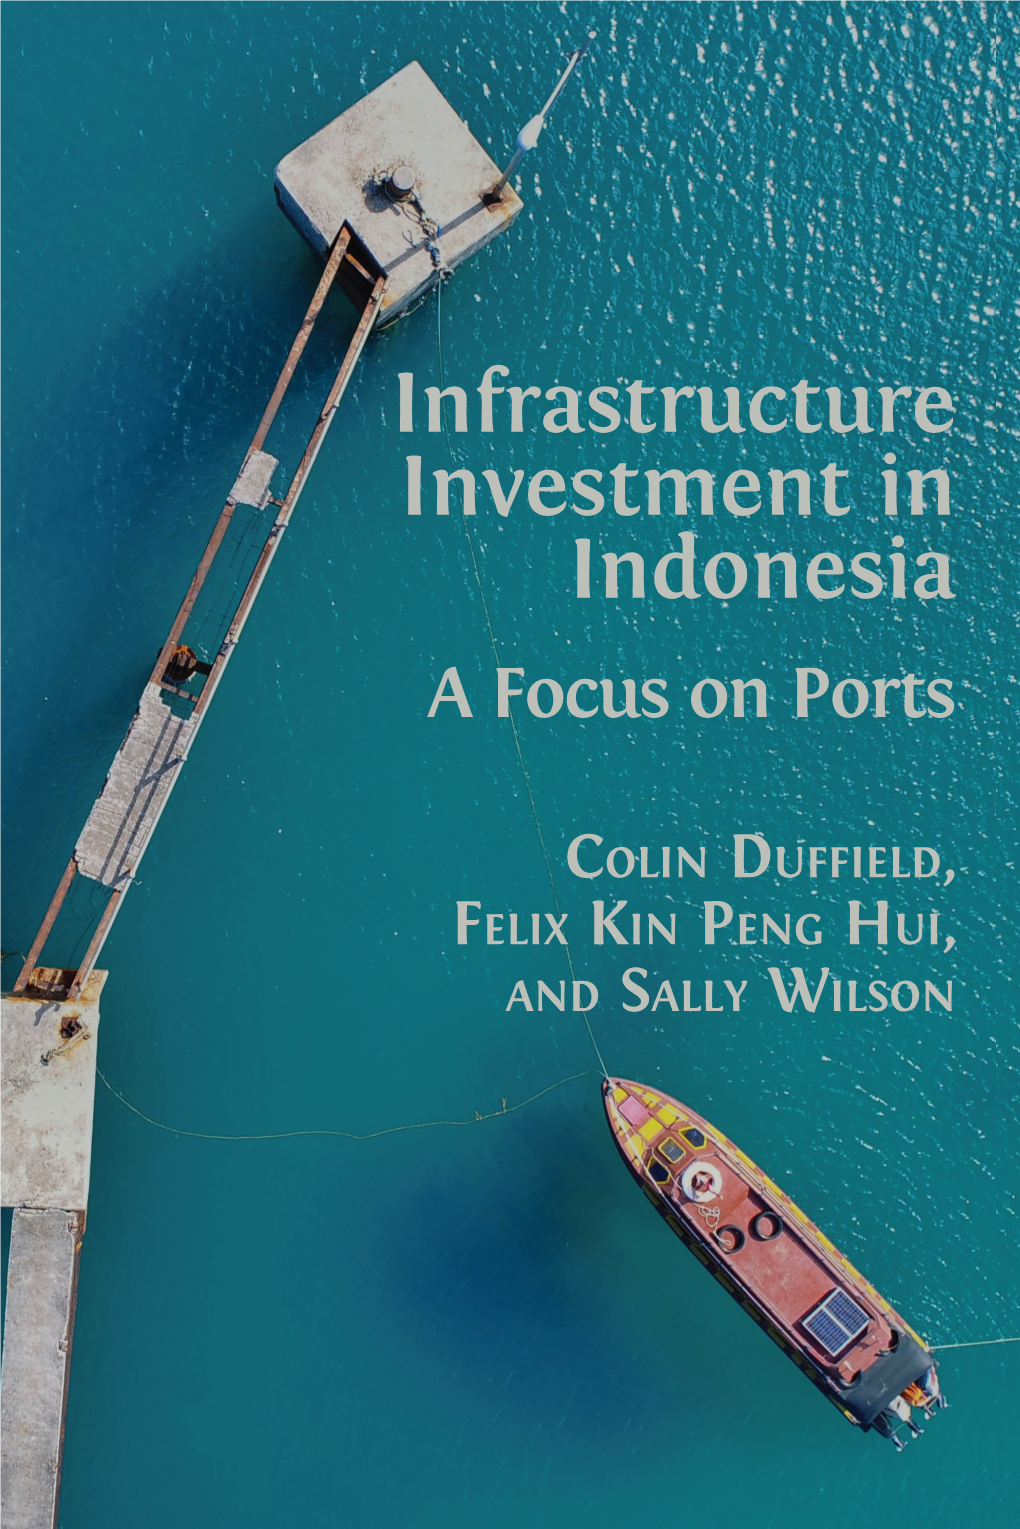 6. Comparative Efficiency Analysis of Australian and Indonesian Ports